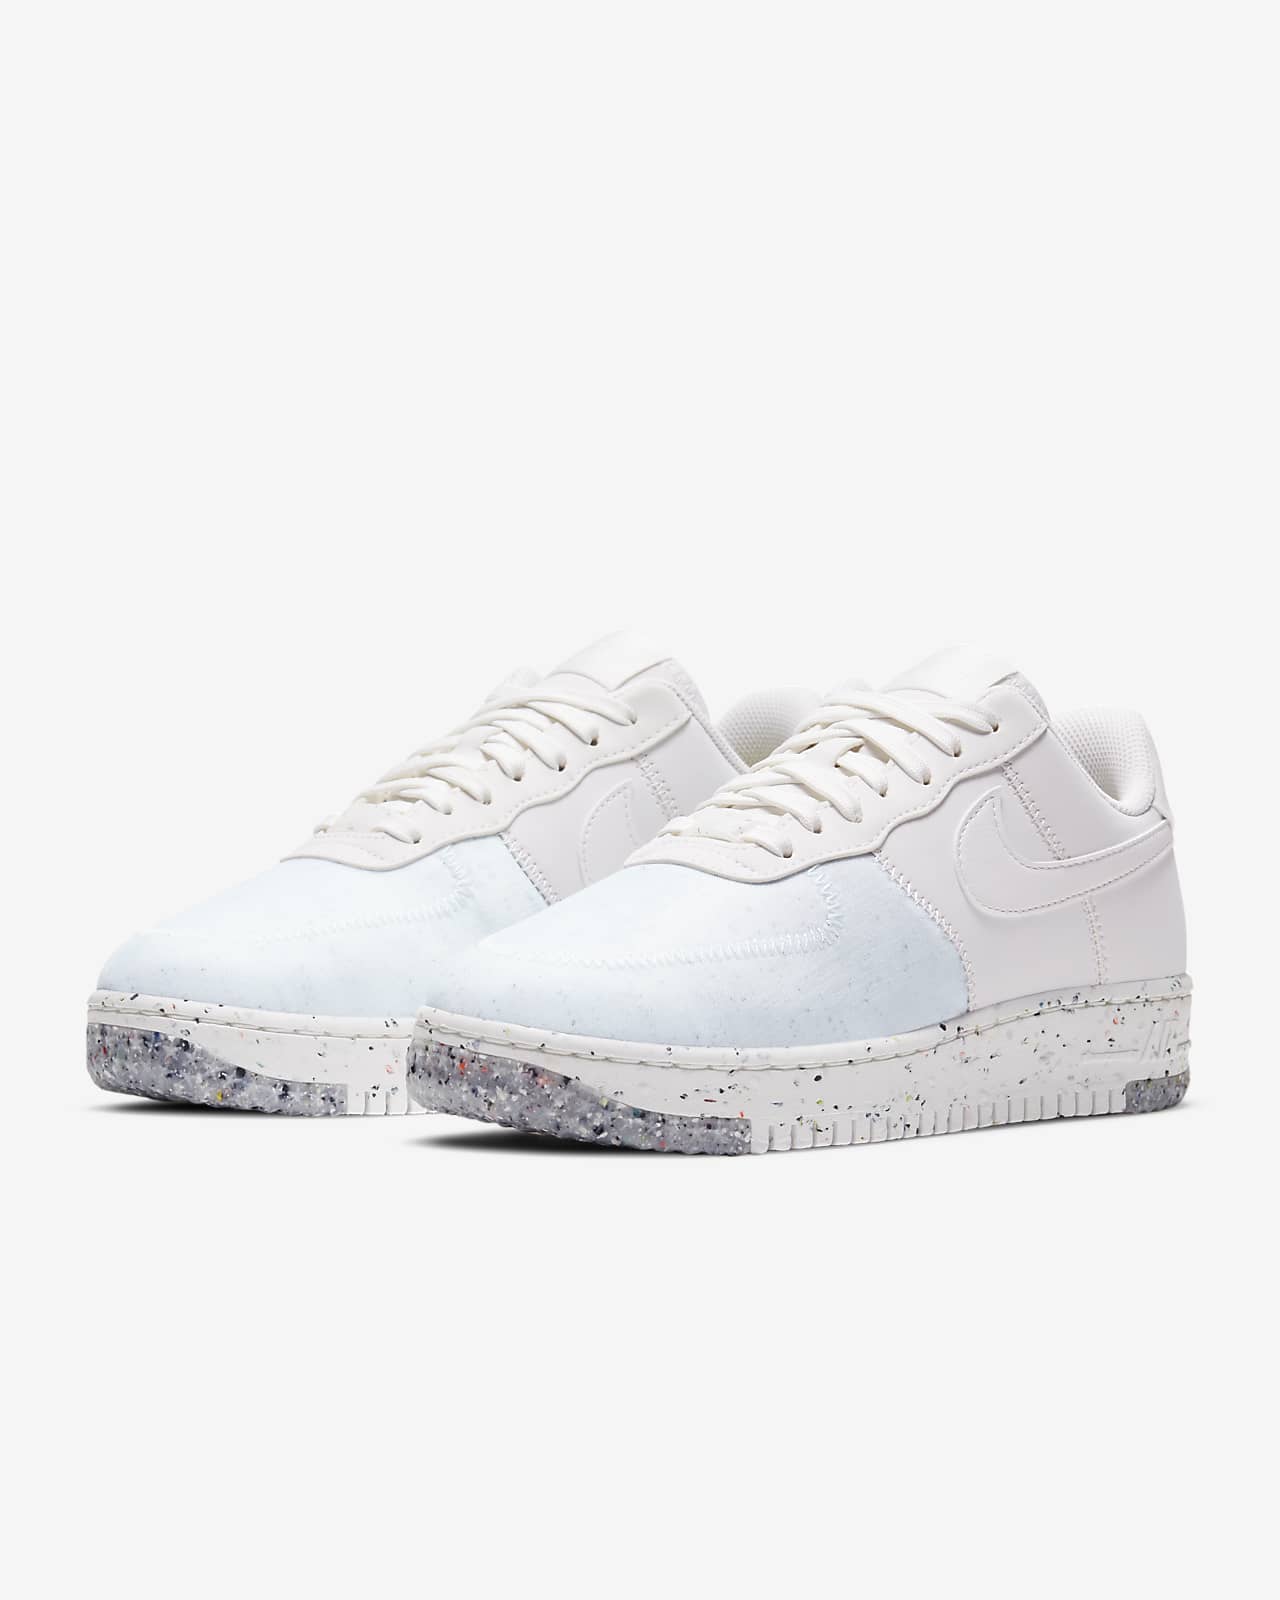 all white forces women's